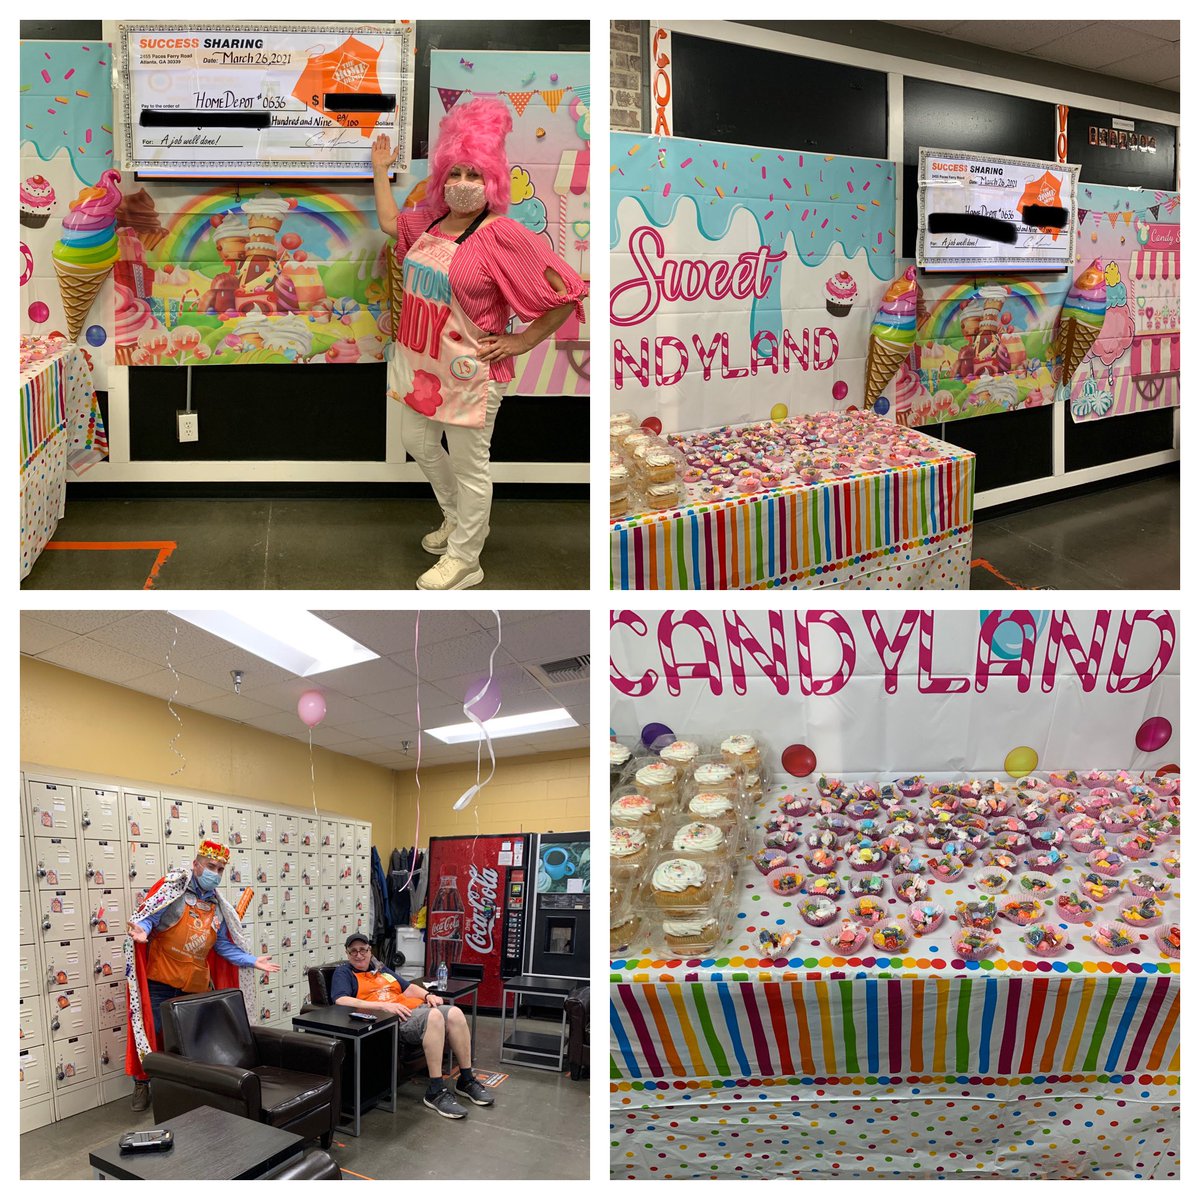 Happy Candy Land day from 0636!!! Congrats to all our amazing associates for an incredible half! Enjoy the celebration. You all deserve it😁!!! #ThrillOfTheVille🌹 @Patrick0hara @AJ_JandaHD @SteveWoodsHD